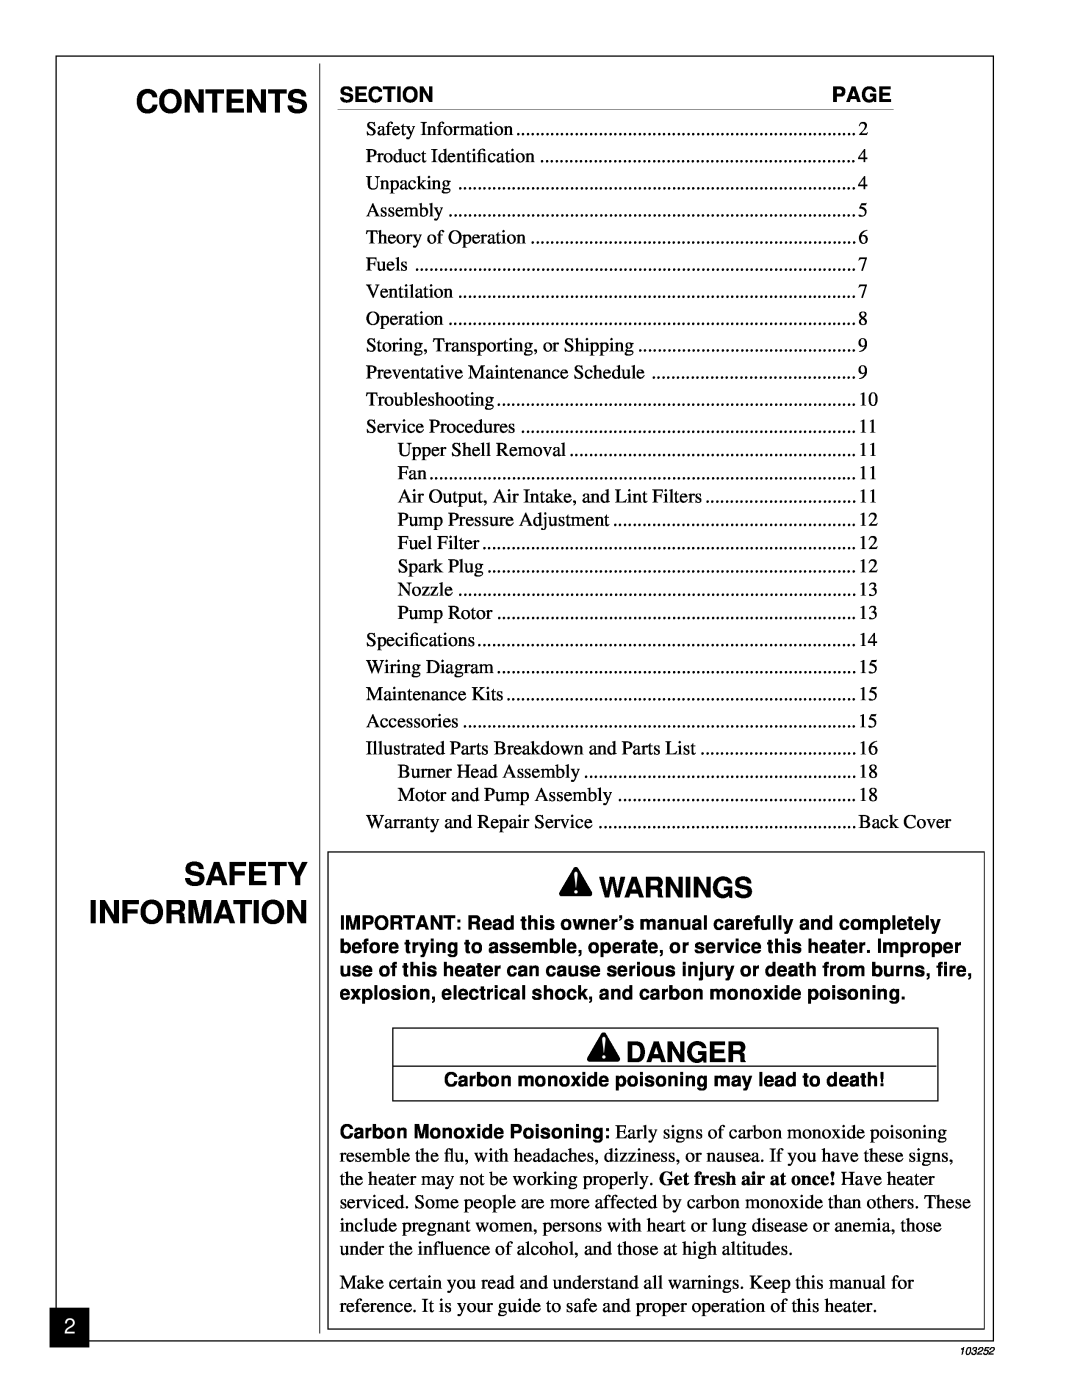 Desa RK150 Contents, Safety Information, Warnings, Danger, Section, Page, Carbon monoxide poisoning may lead to death 